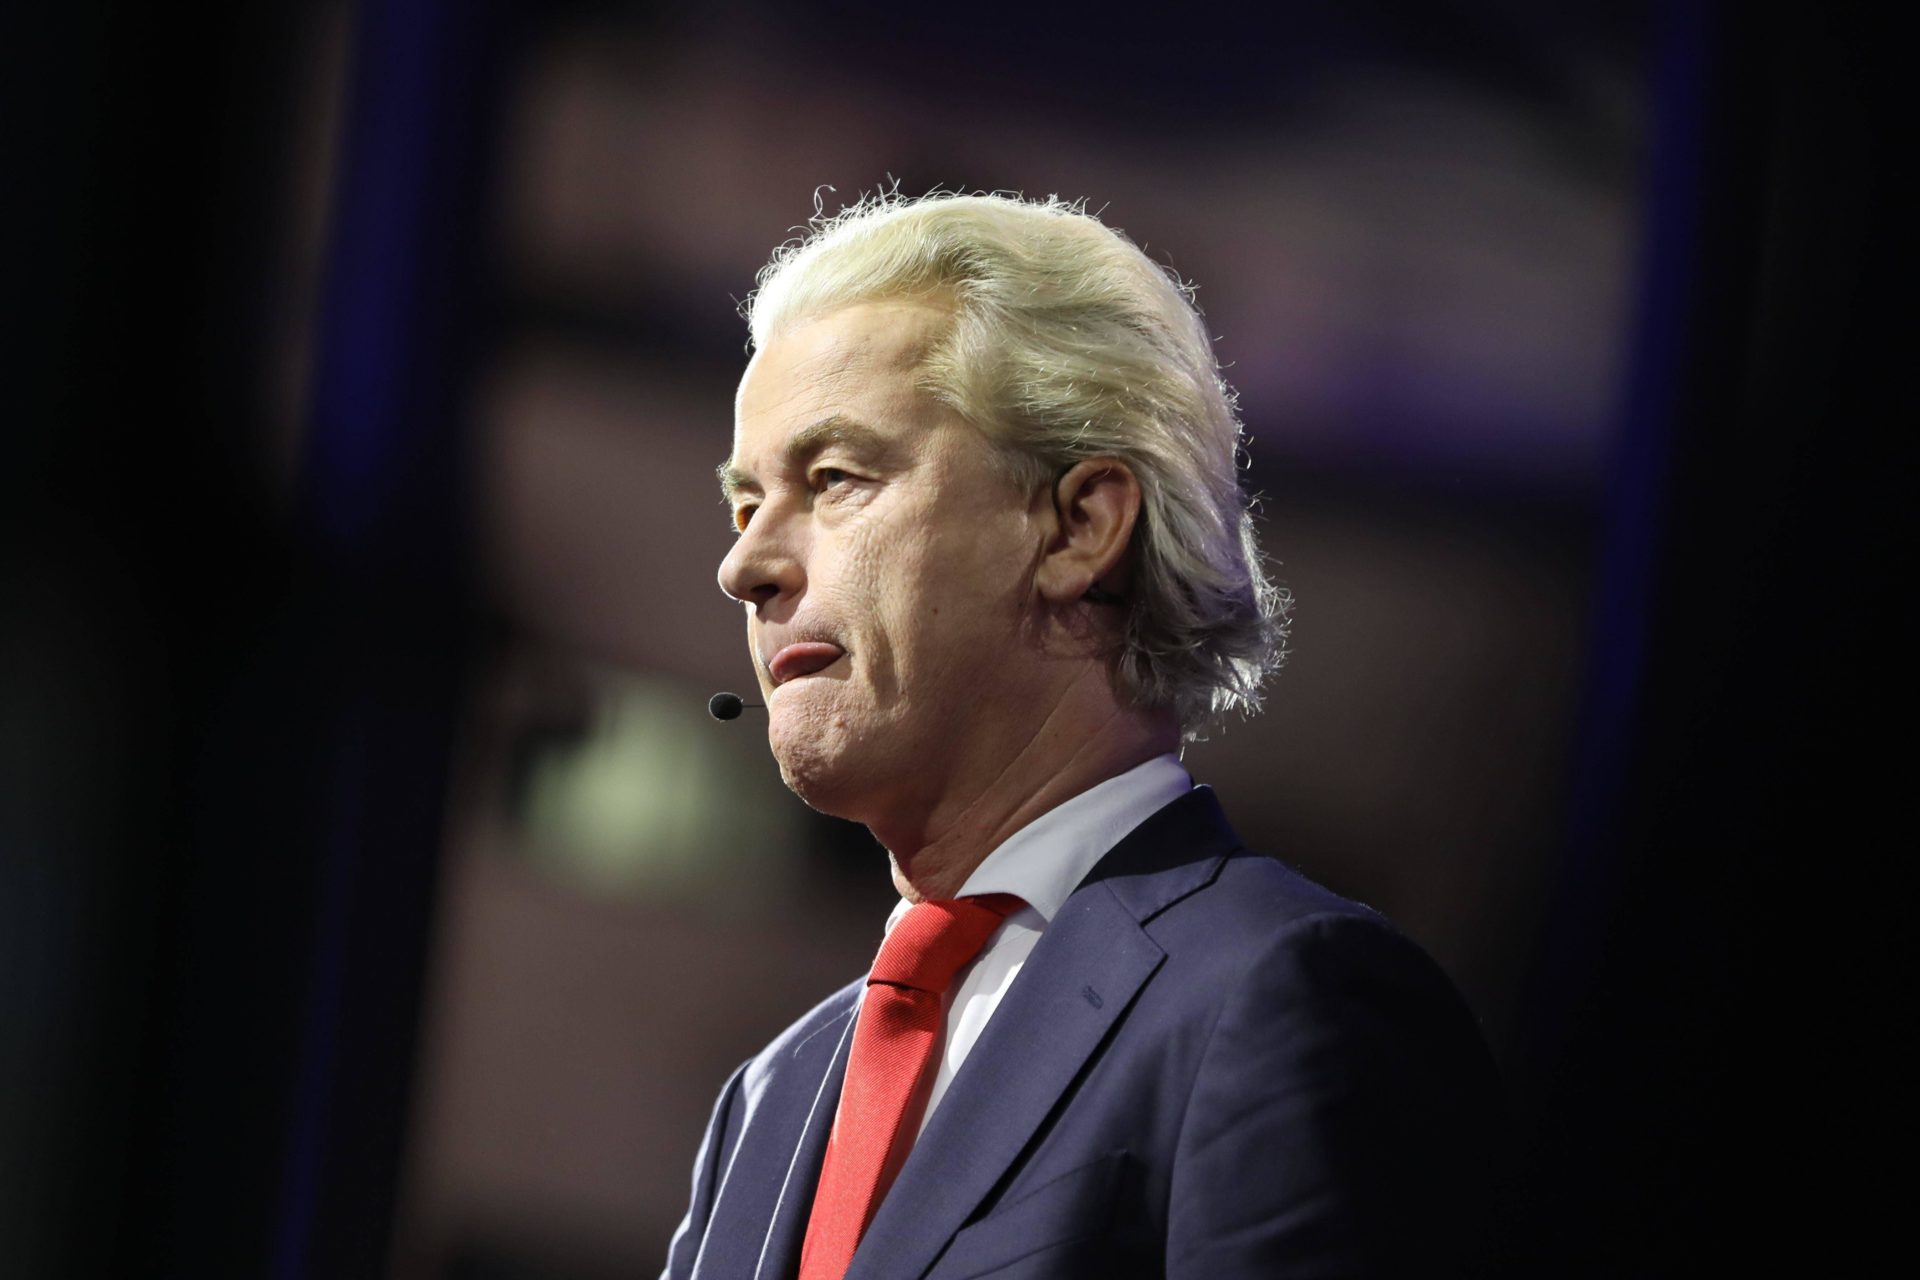 Geert Wilders takes part in a TV debate on the eve of election night